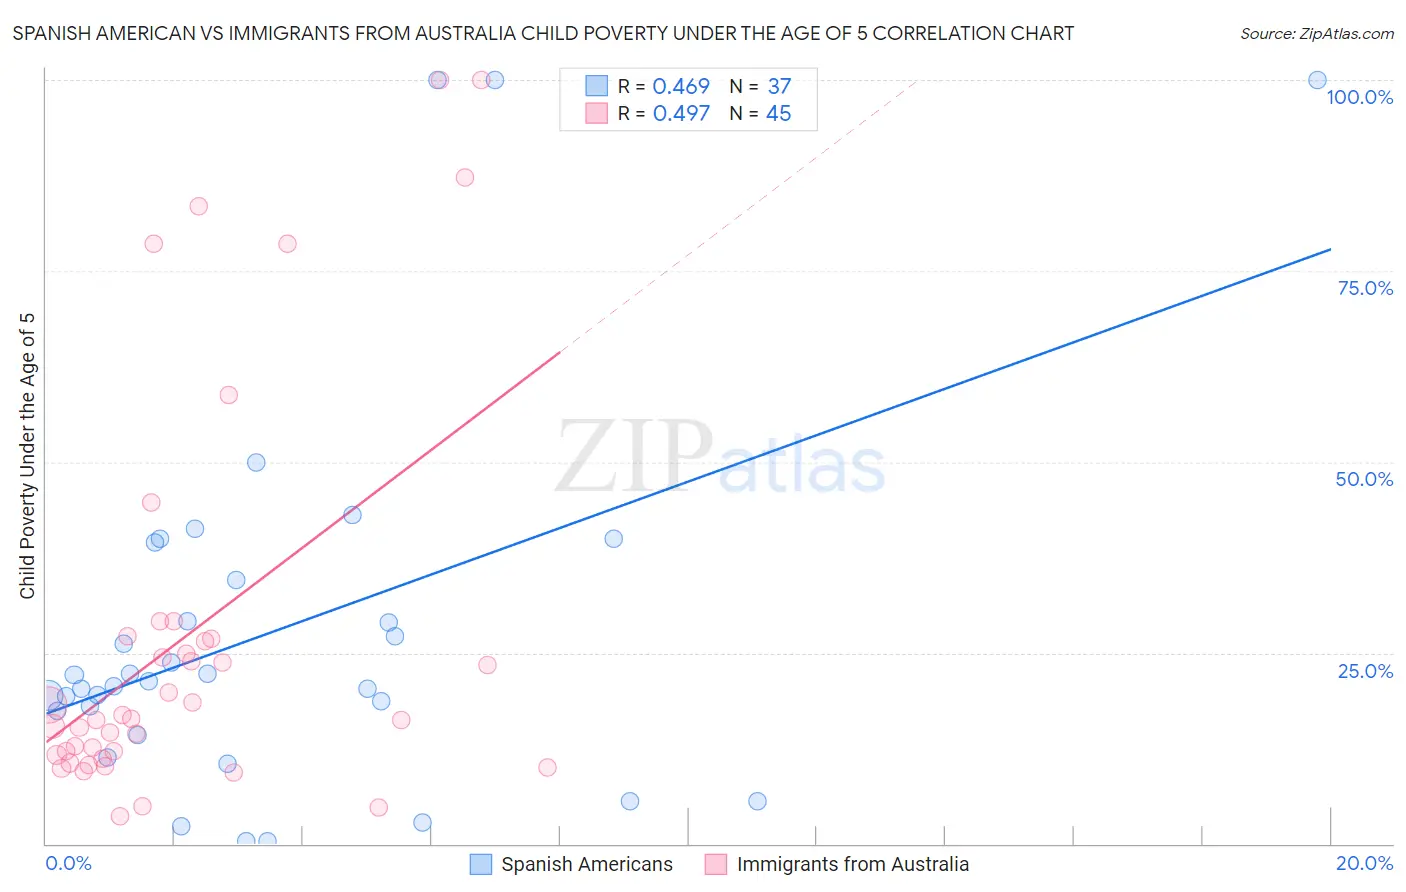 Spanish American vs Immigrants from Australia Child Poverty Under the Age of 5